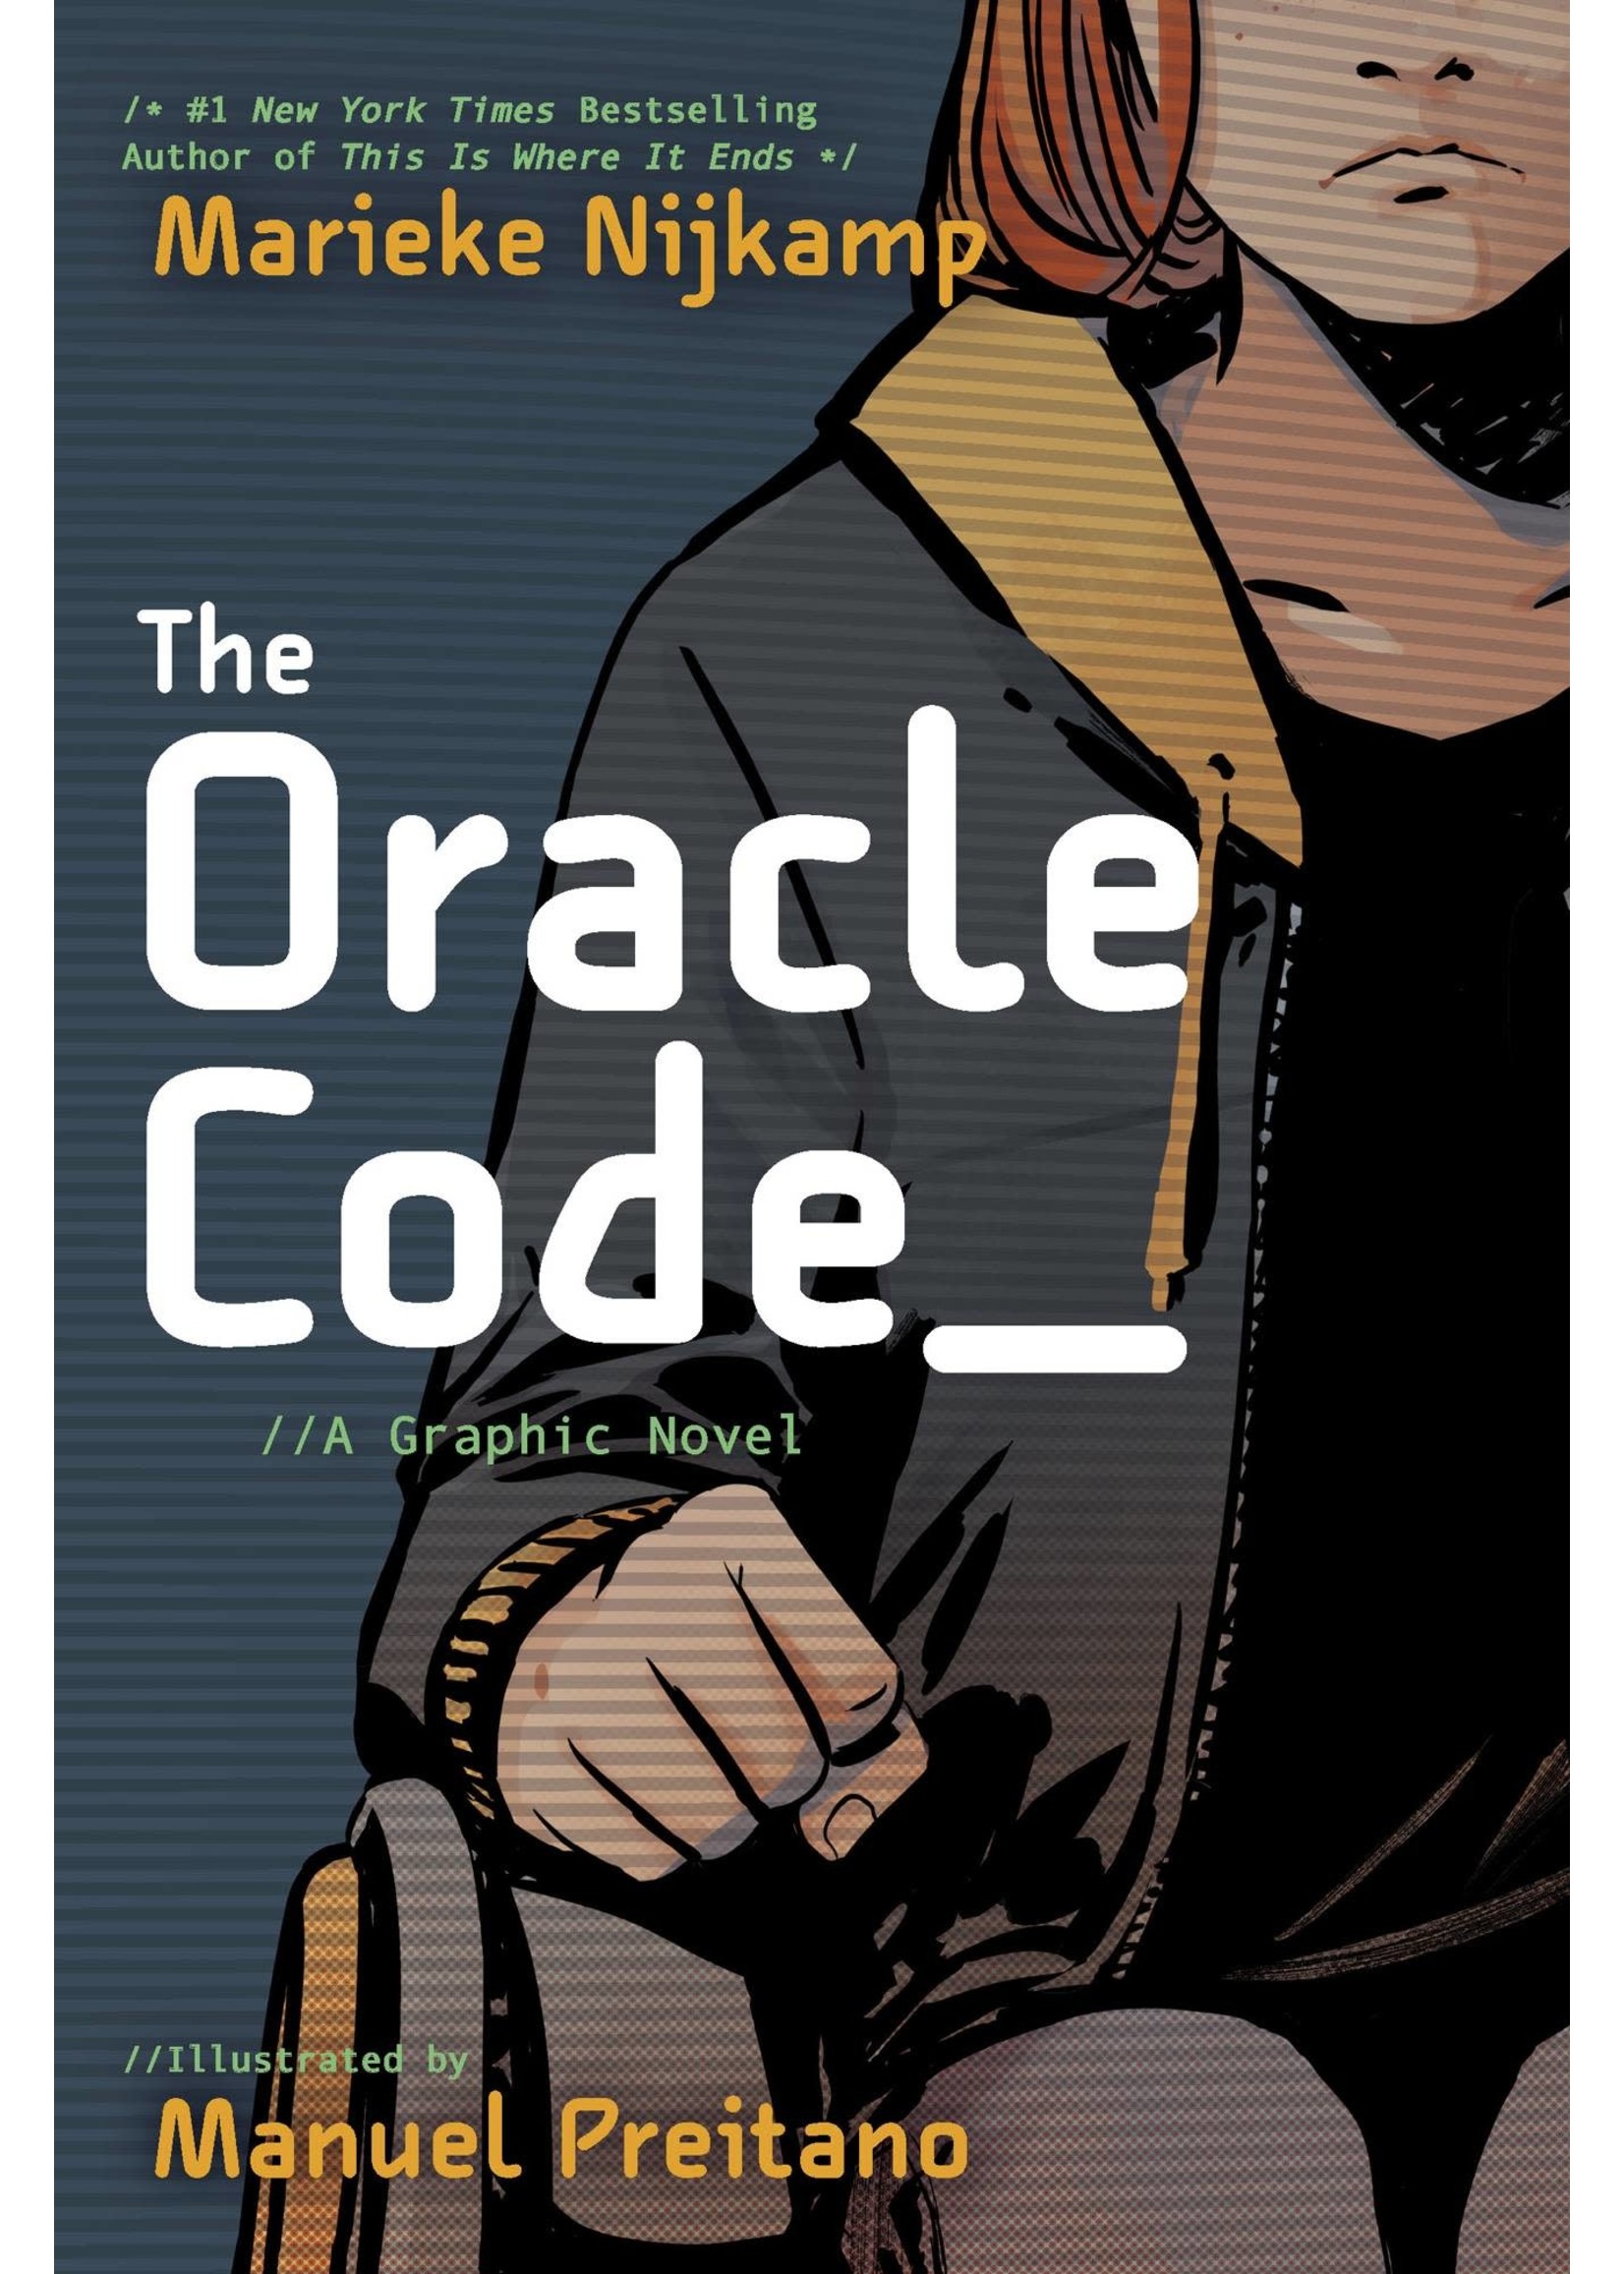 DC COMICS THE ORACLE CODE